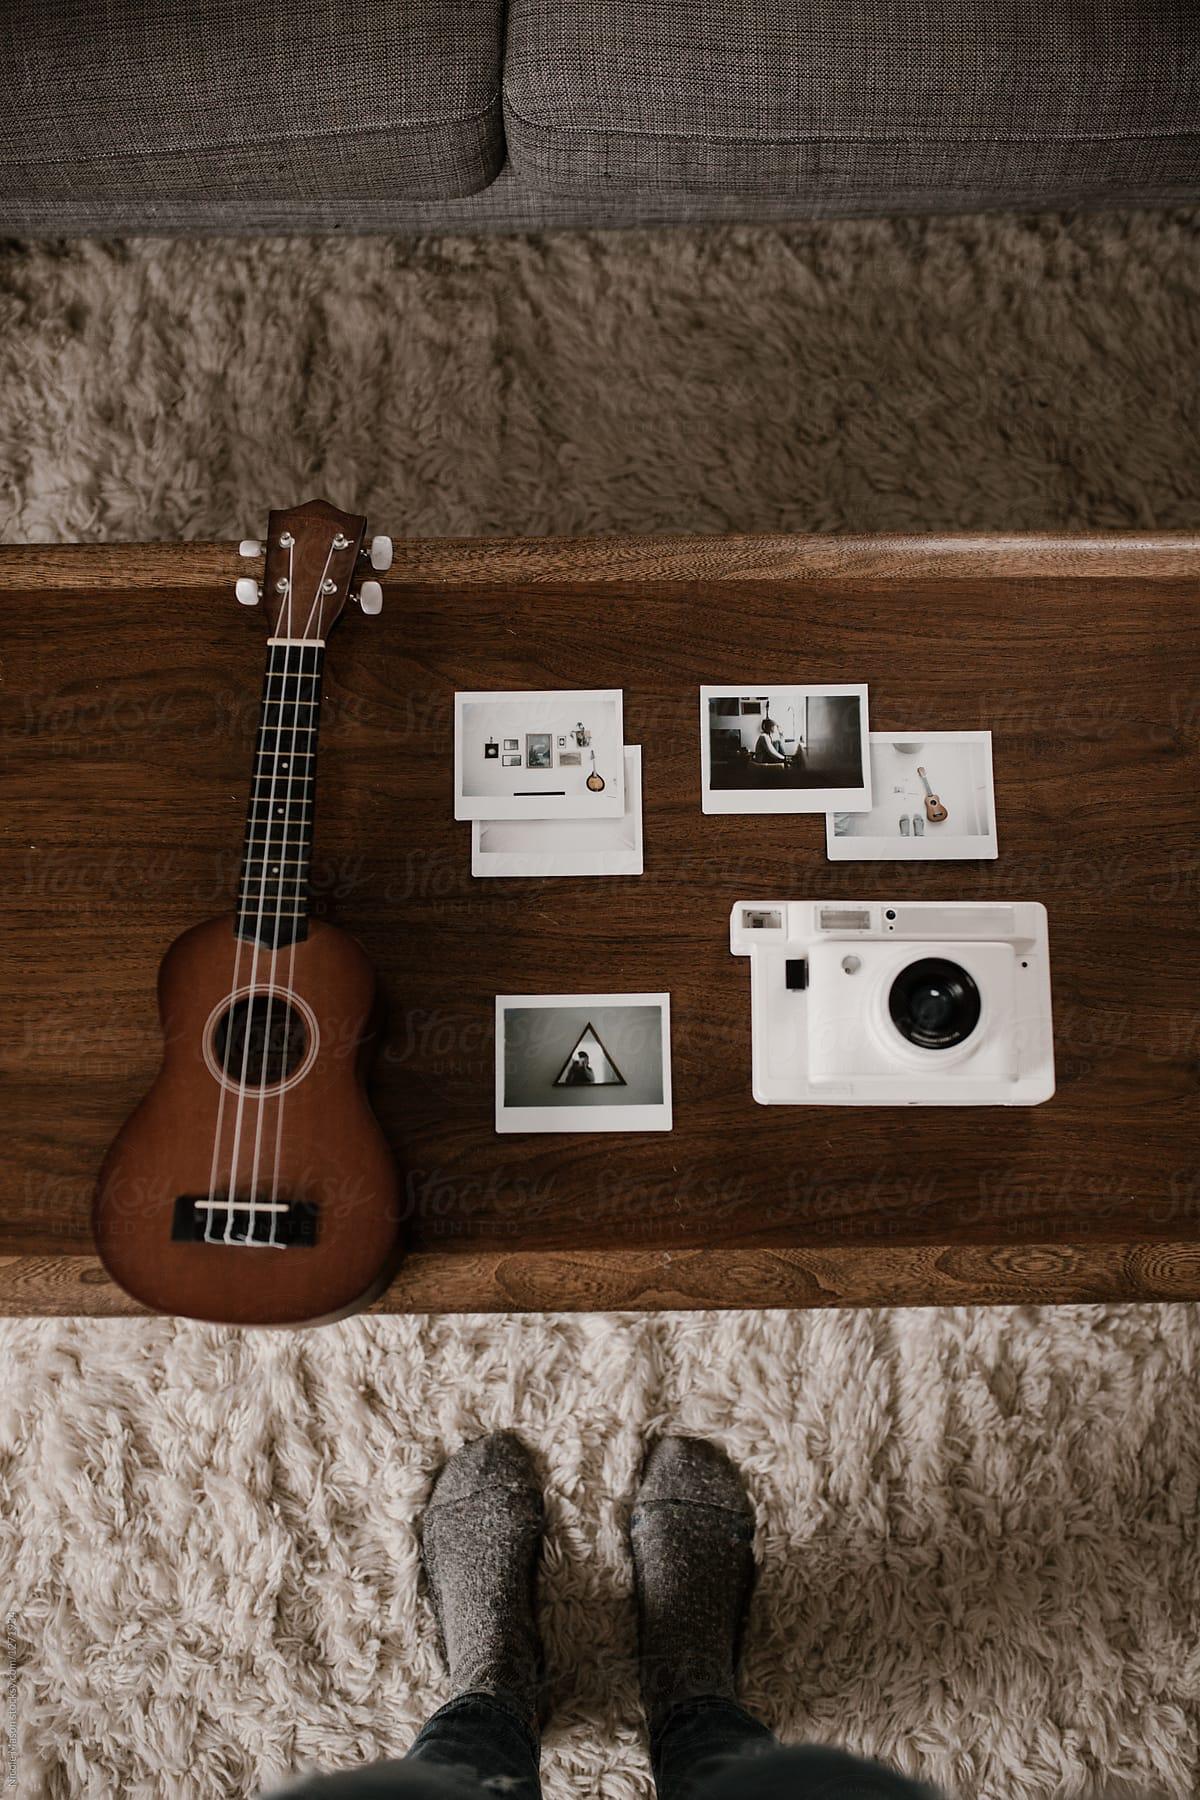 camera, photo and ukulele arranged on coffee table in cozy